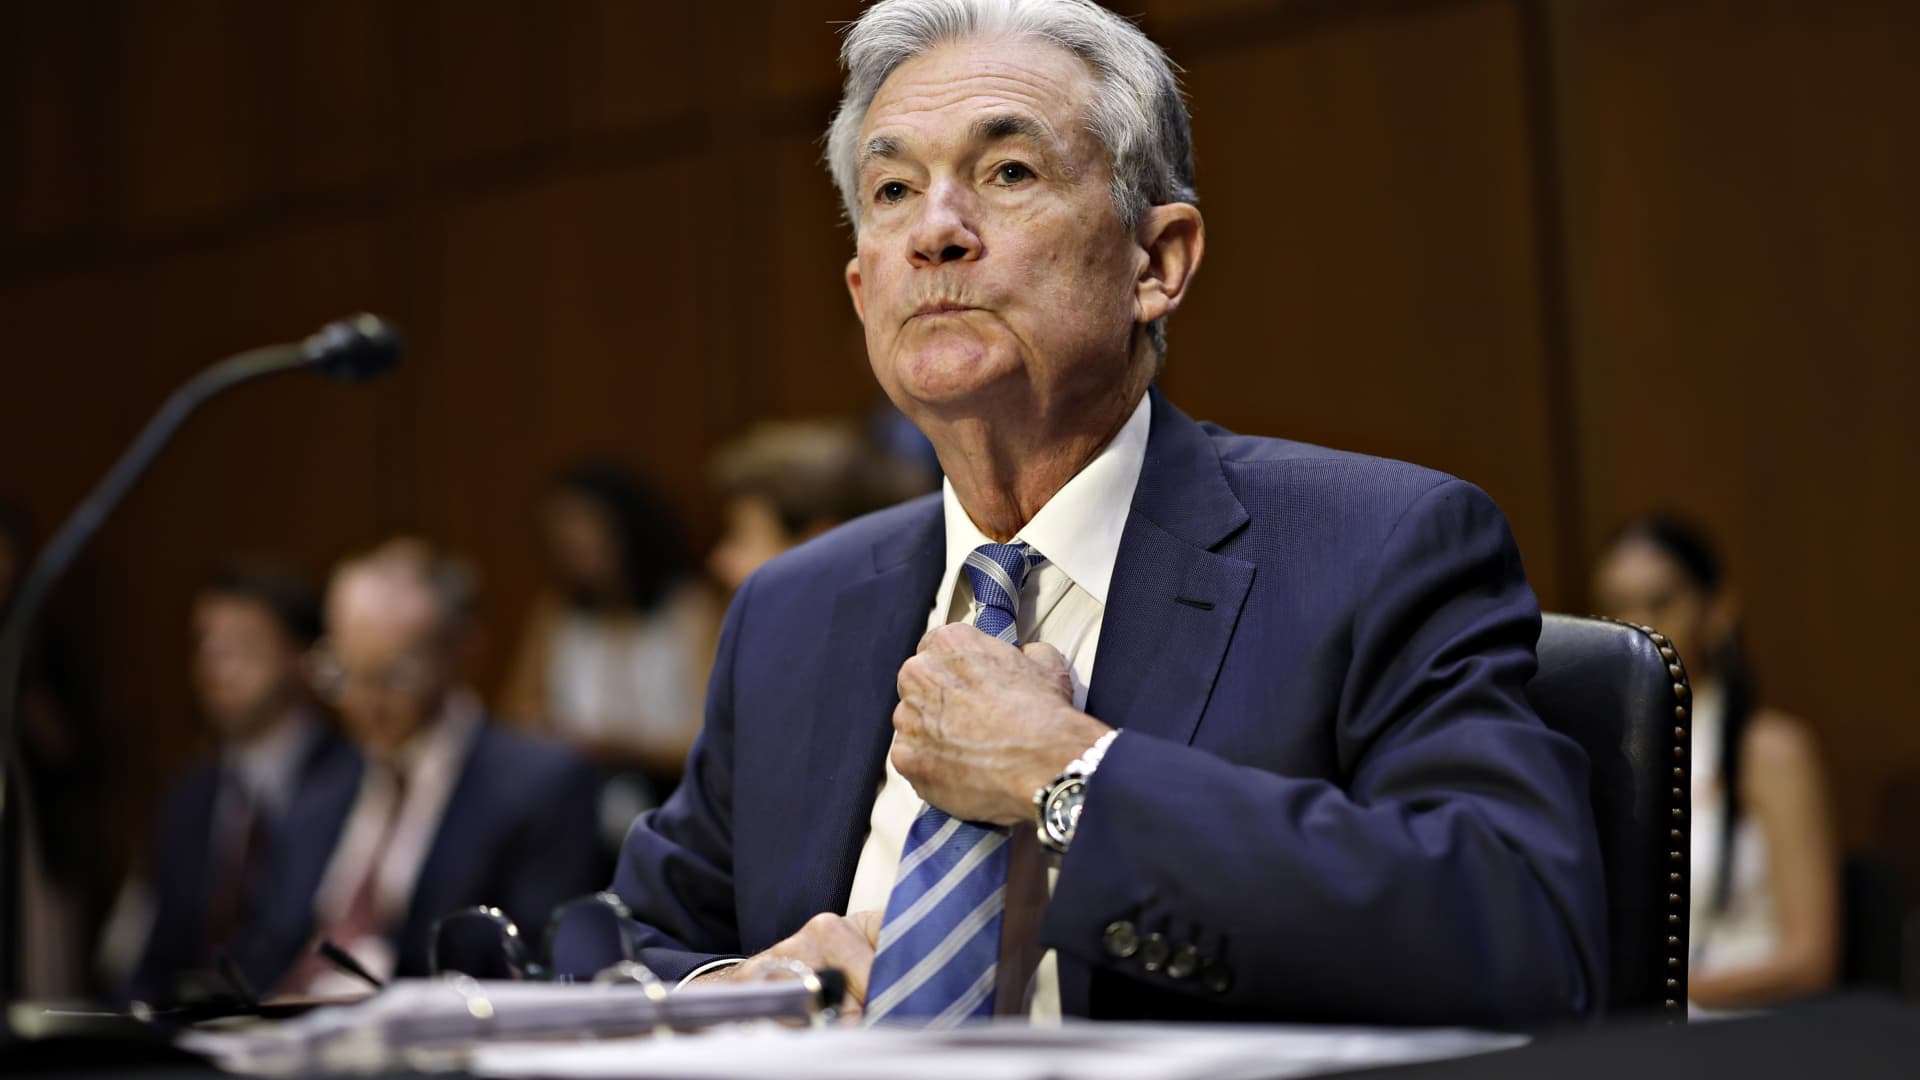 Powell tells Congress the Fed is 'strongly committed' on inflation, notes recession is a 'possibility'